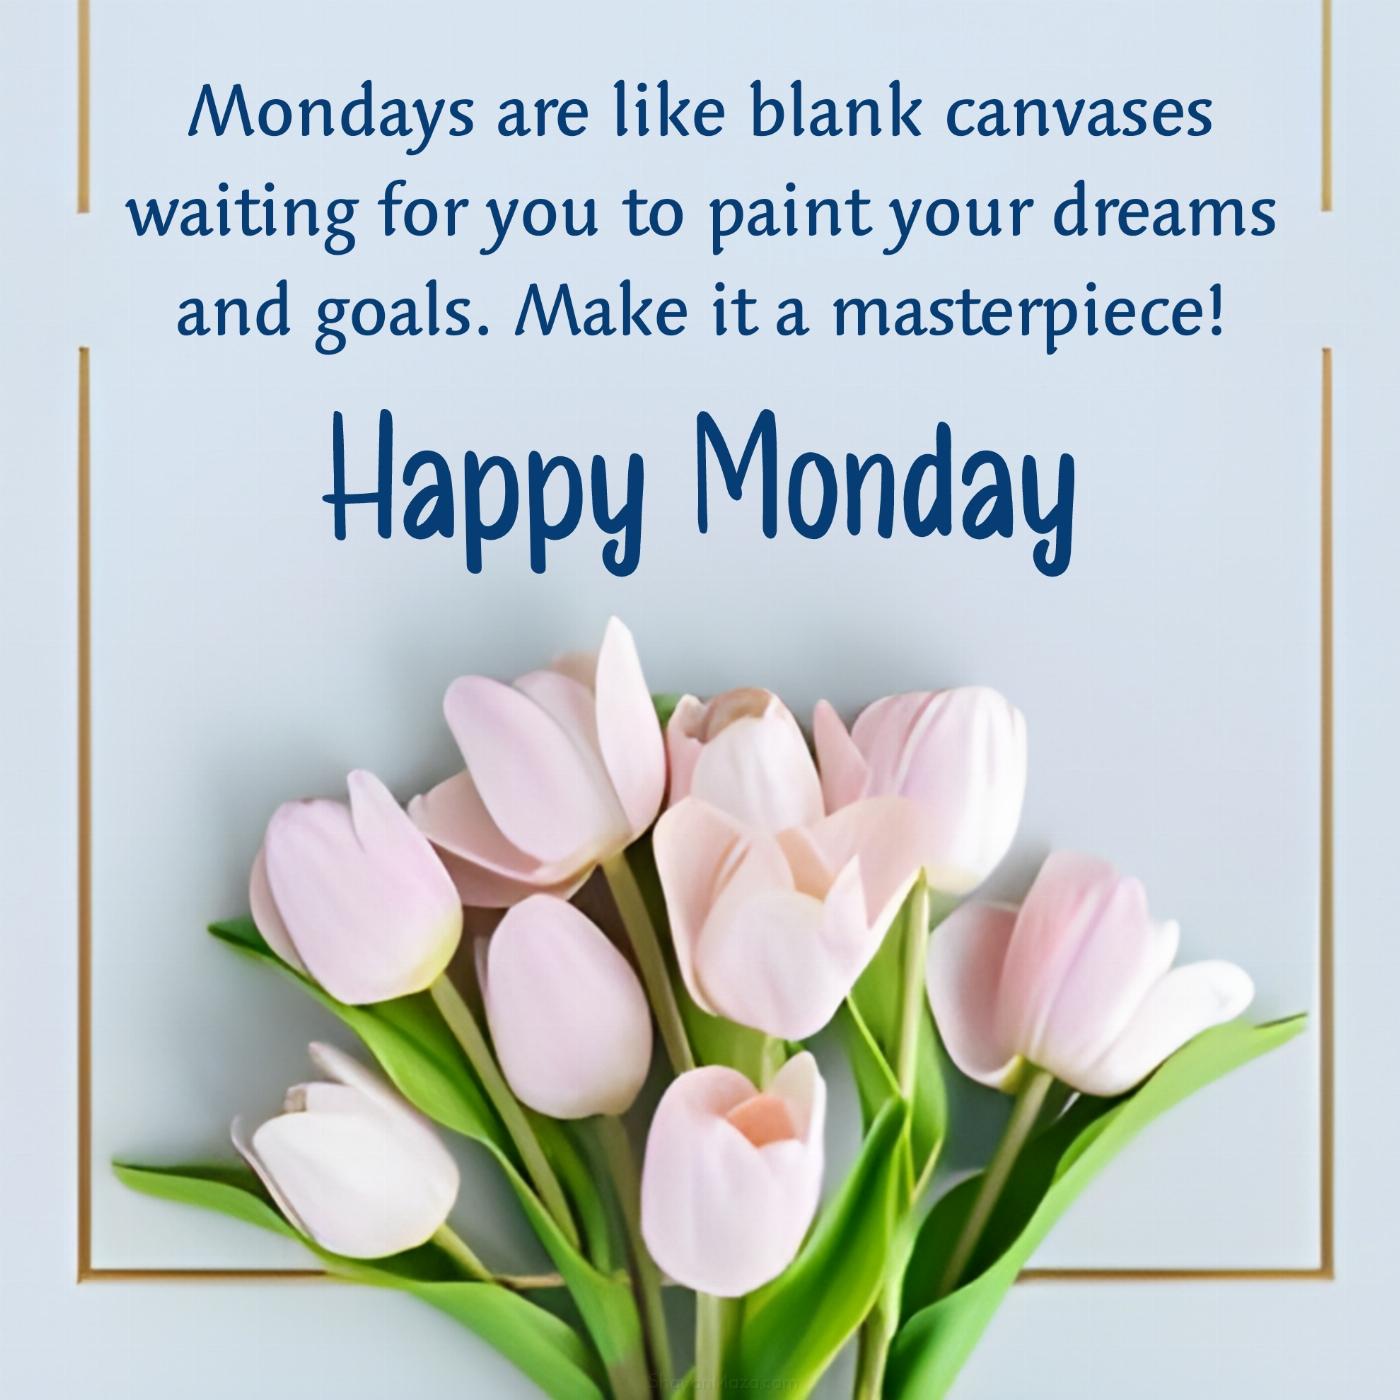 Mondays are like blank canvases waiting for you